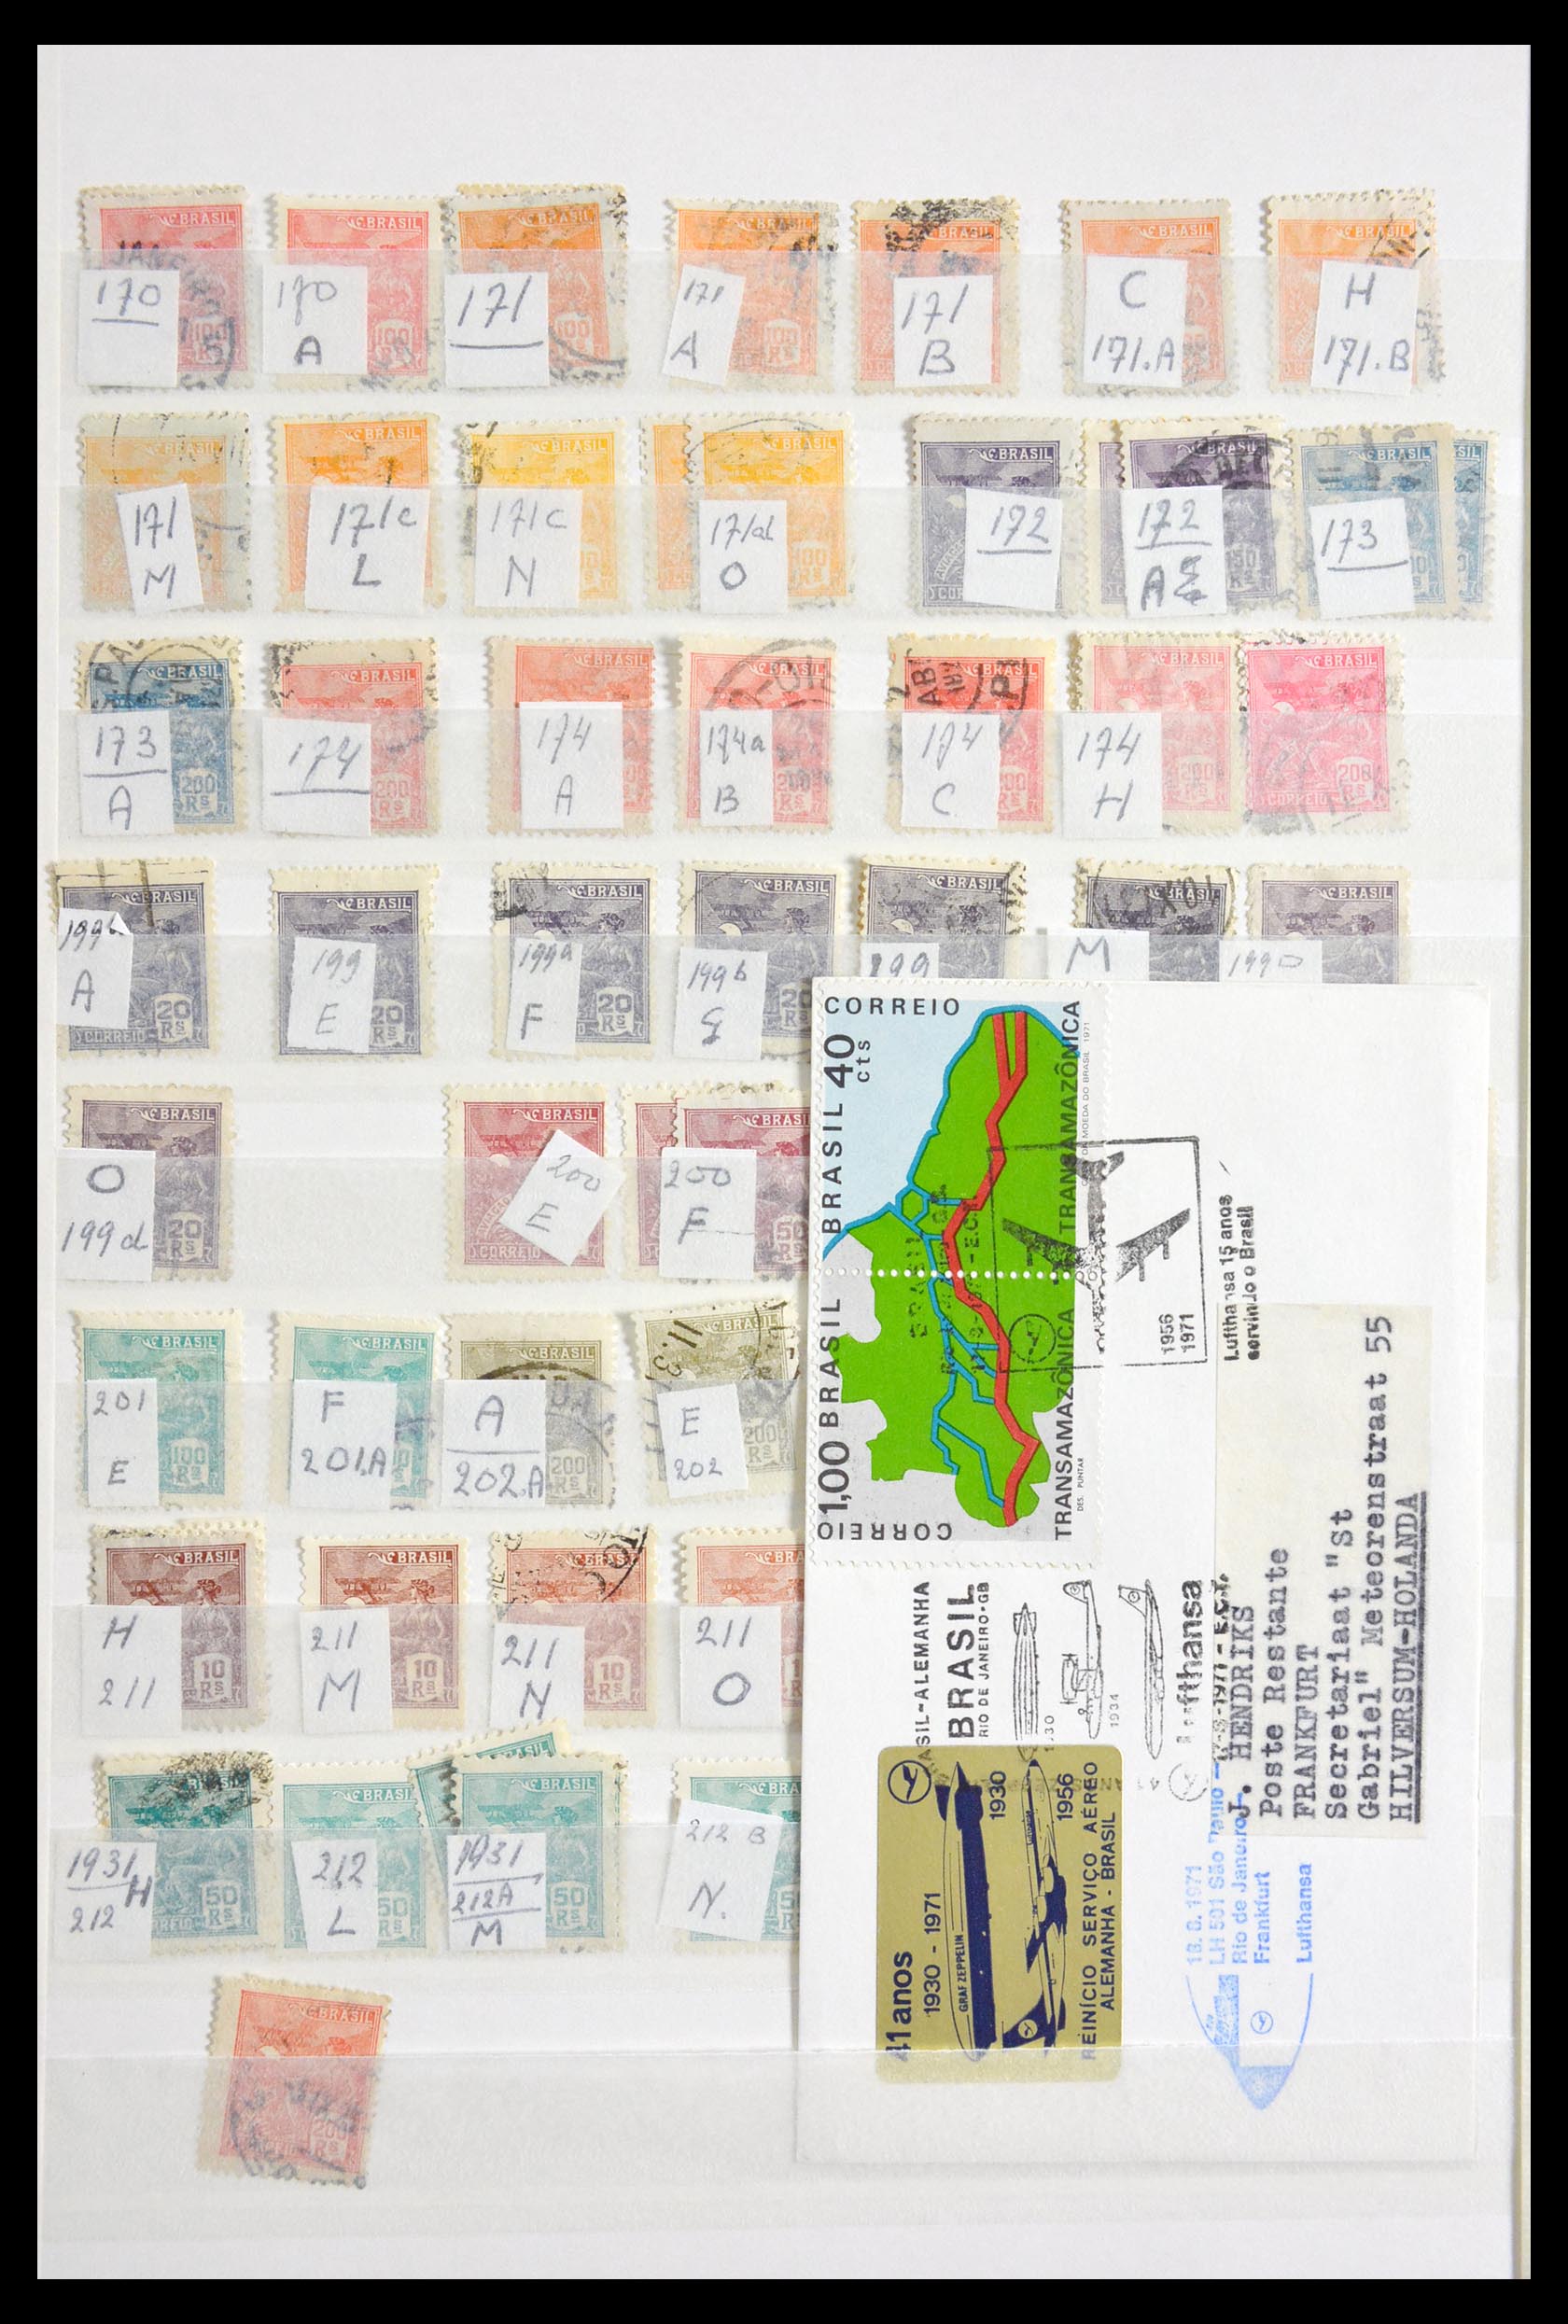 29917 030 - 29917 Latin America airmail stamps.